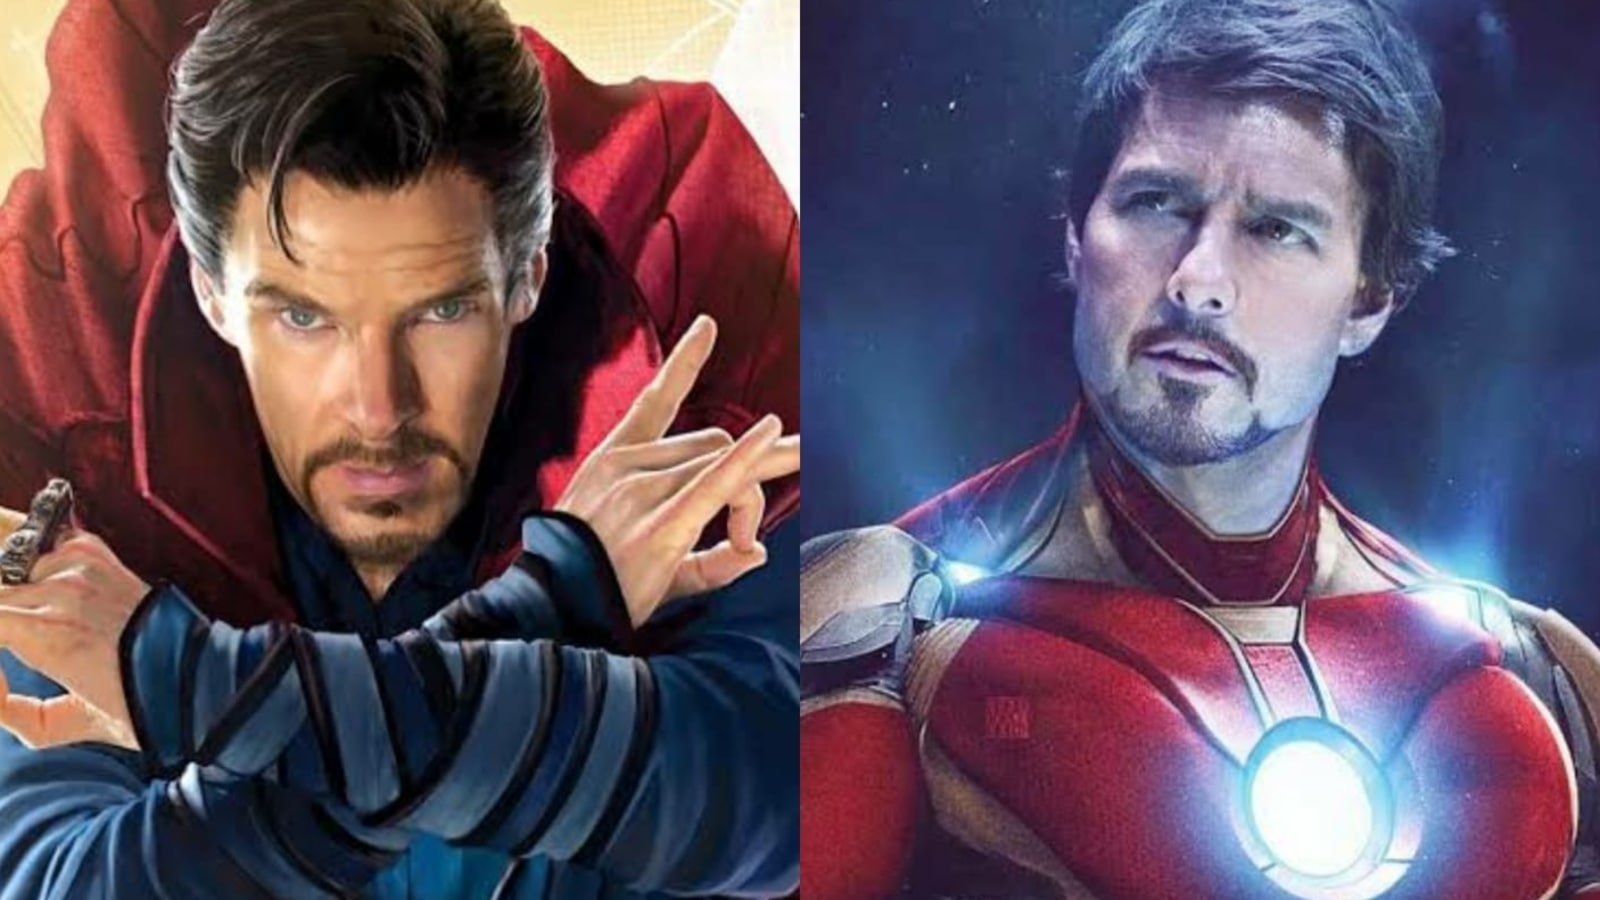 Tom Cruise's Iron Man spotted in Doctor Strange 2 trailer? Fans share proof